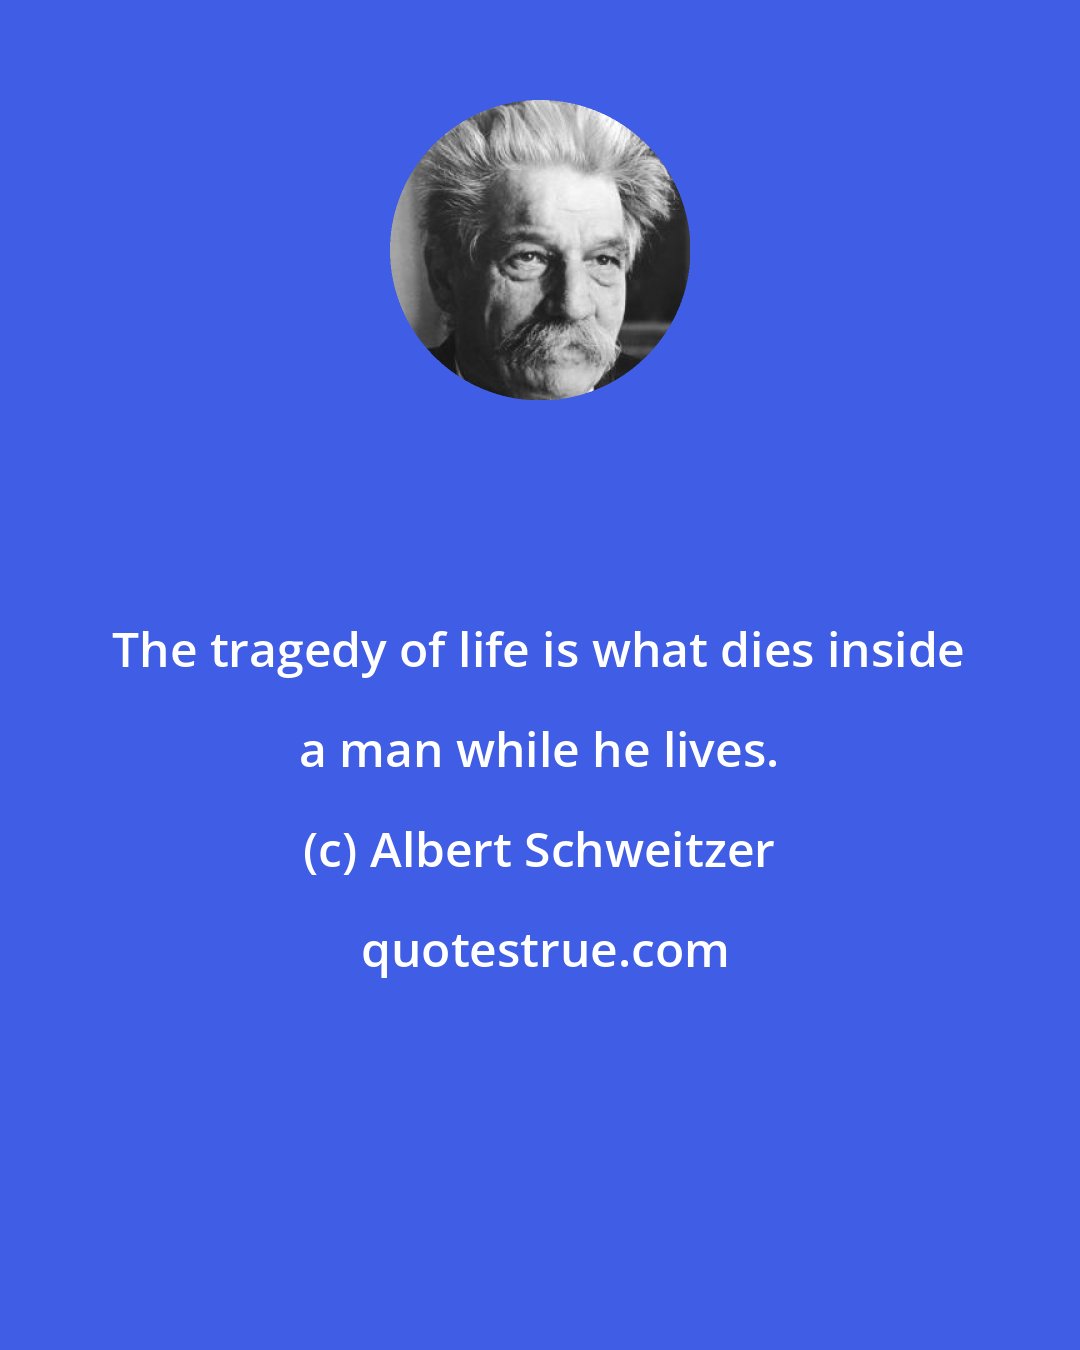 Albert Schweitzer: The tragedy of life is what dies inside a man while he lives.